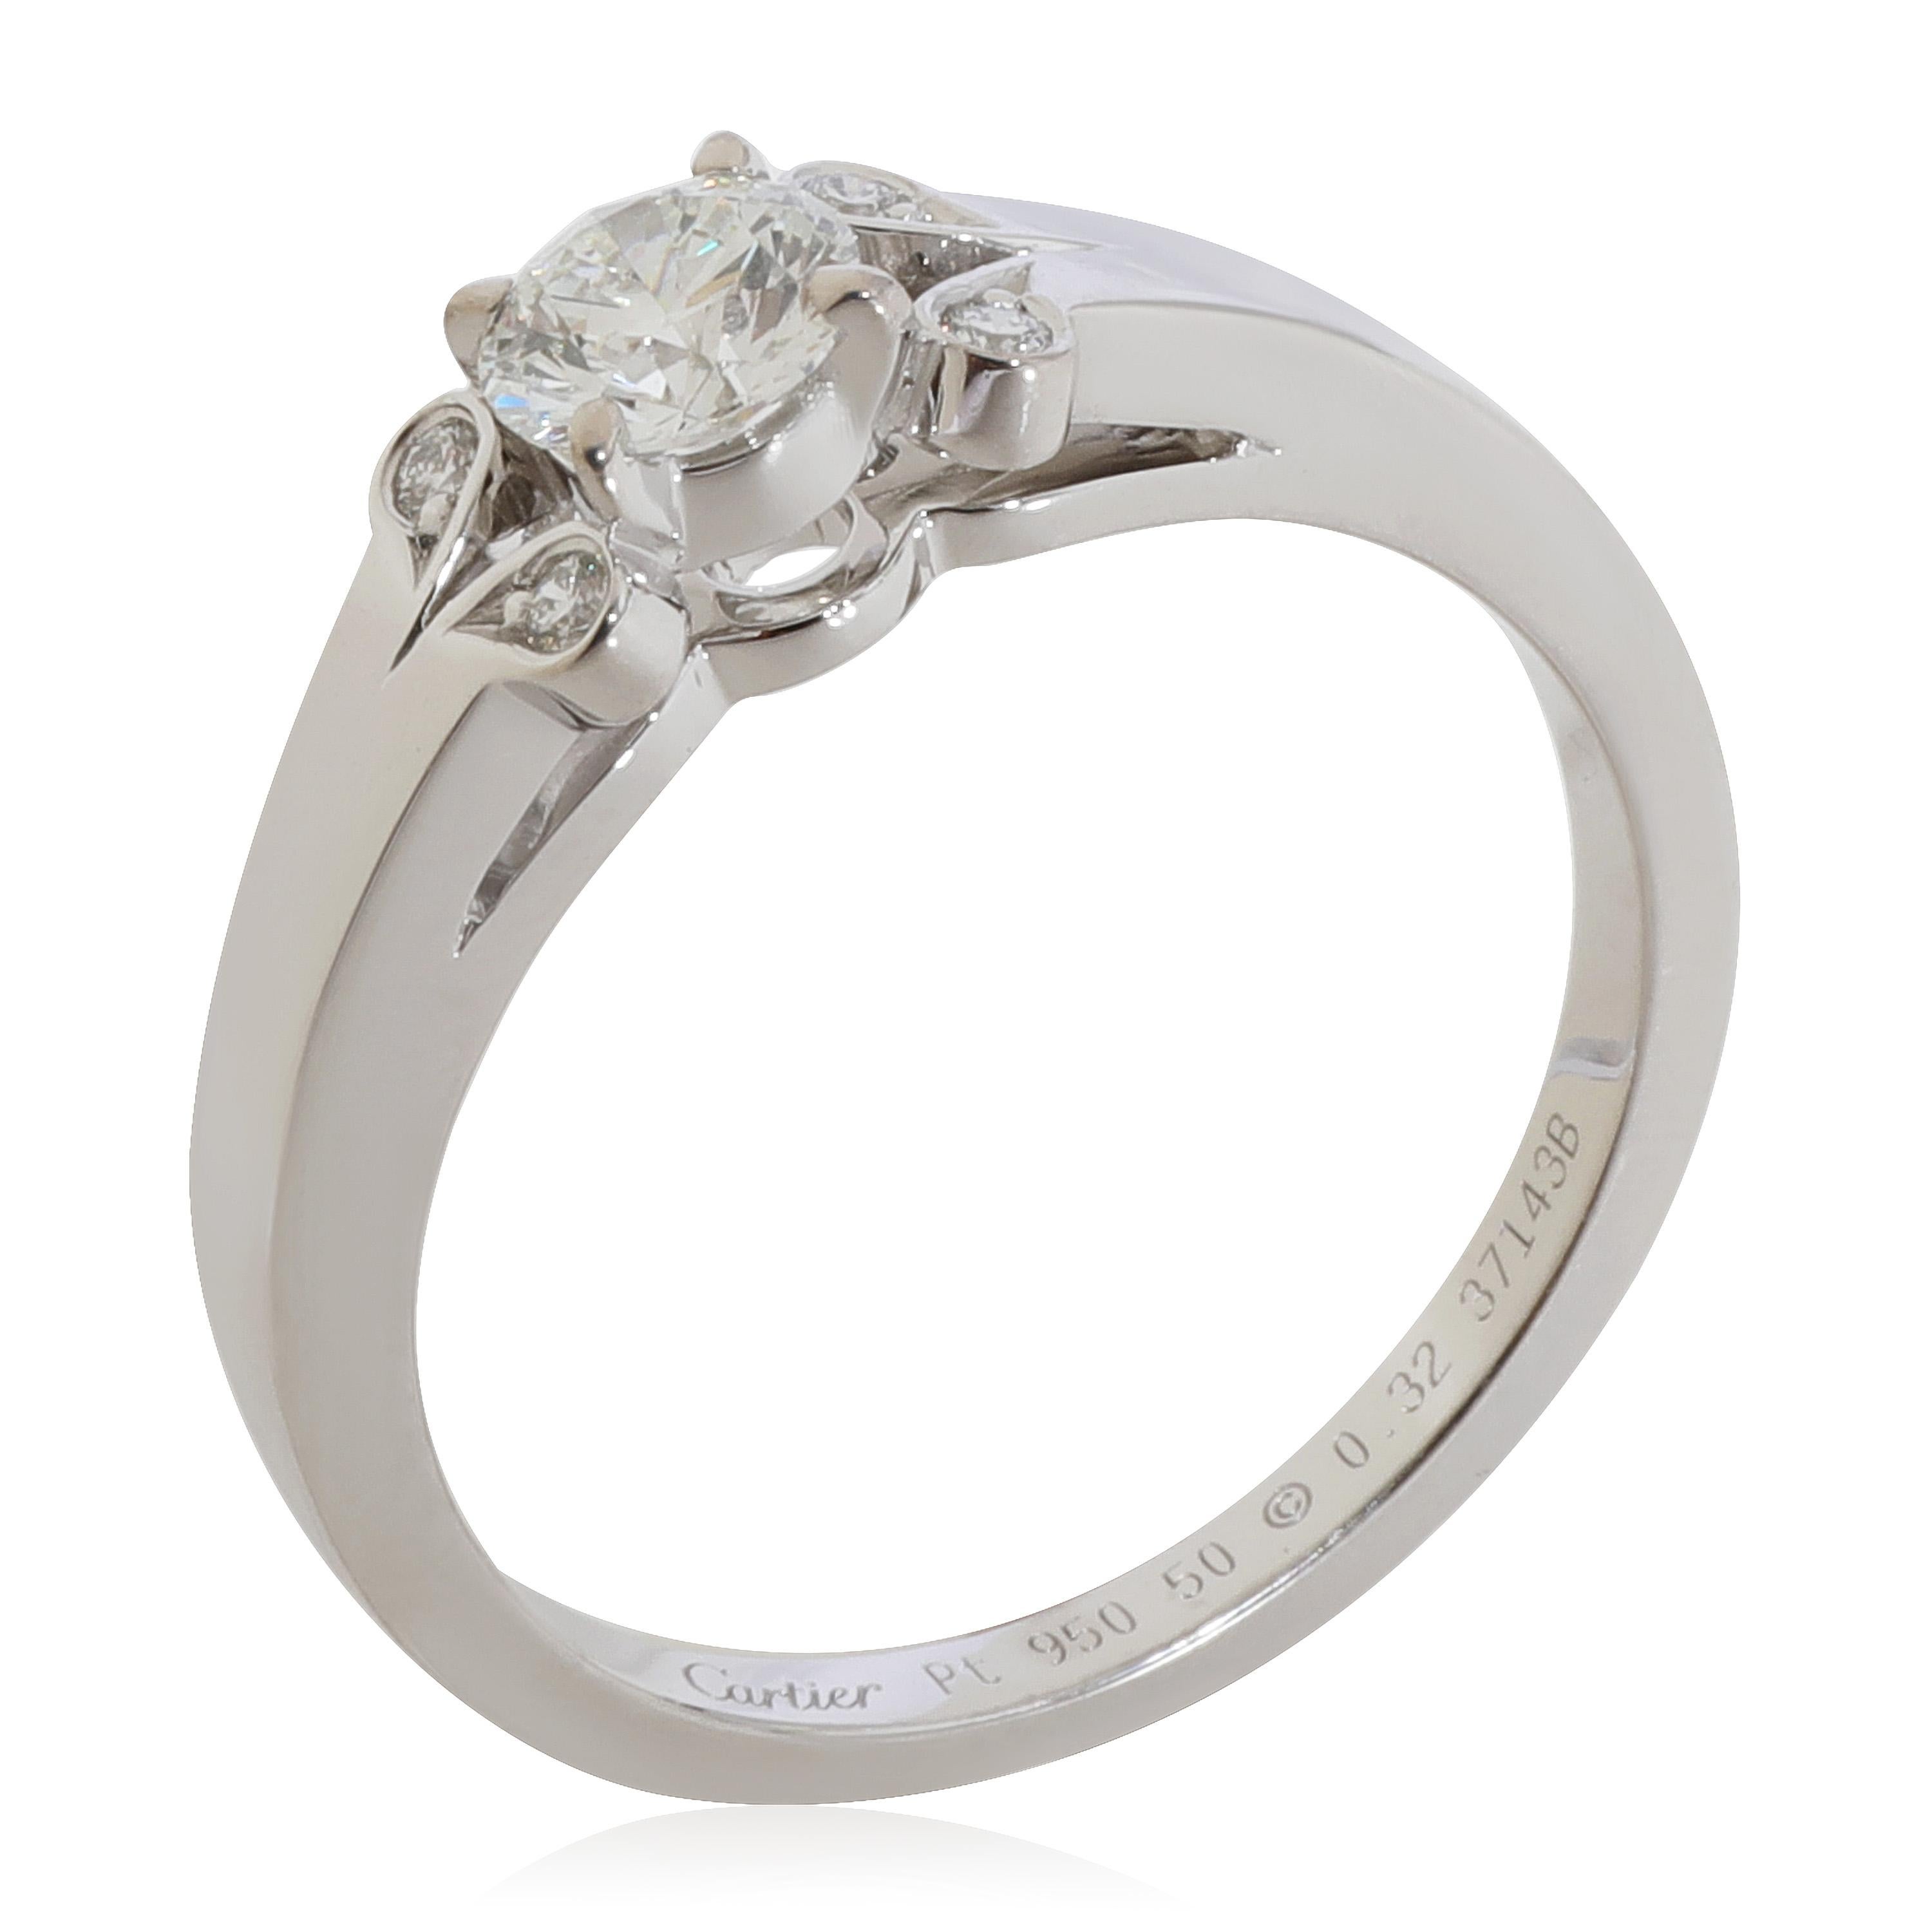 Cartier Ballerine Diamond Engagement Ring in Platinum F VVS2 0.35 CT

PRIMARY DETAILS
SKU: 124315
Listing Title: Cartier Ballerine Diamond Engagement Ring in Platinum F VVS2 0.35 CT
Condition Description: Retails for 5100 USD. In excellent condition